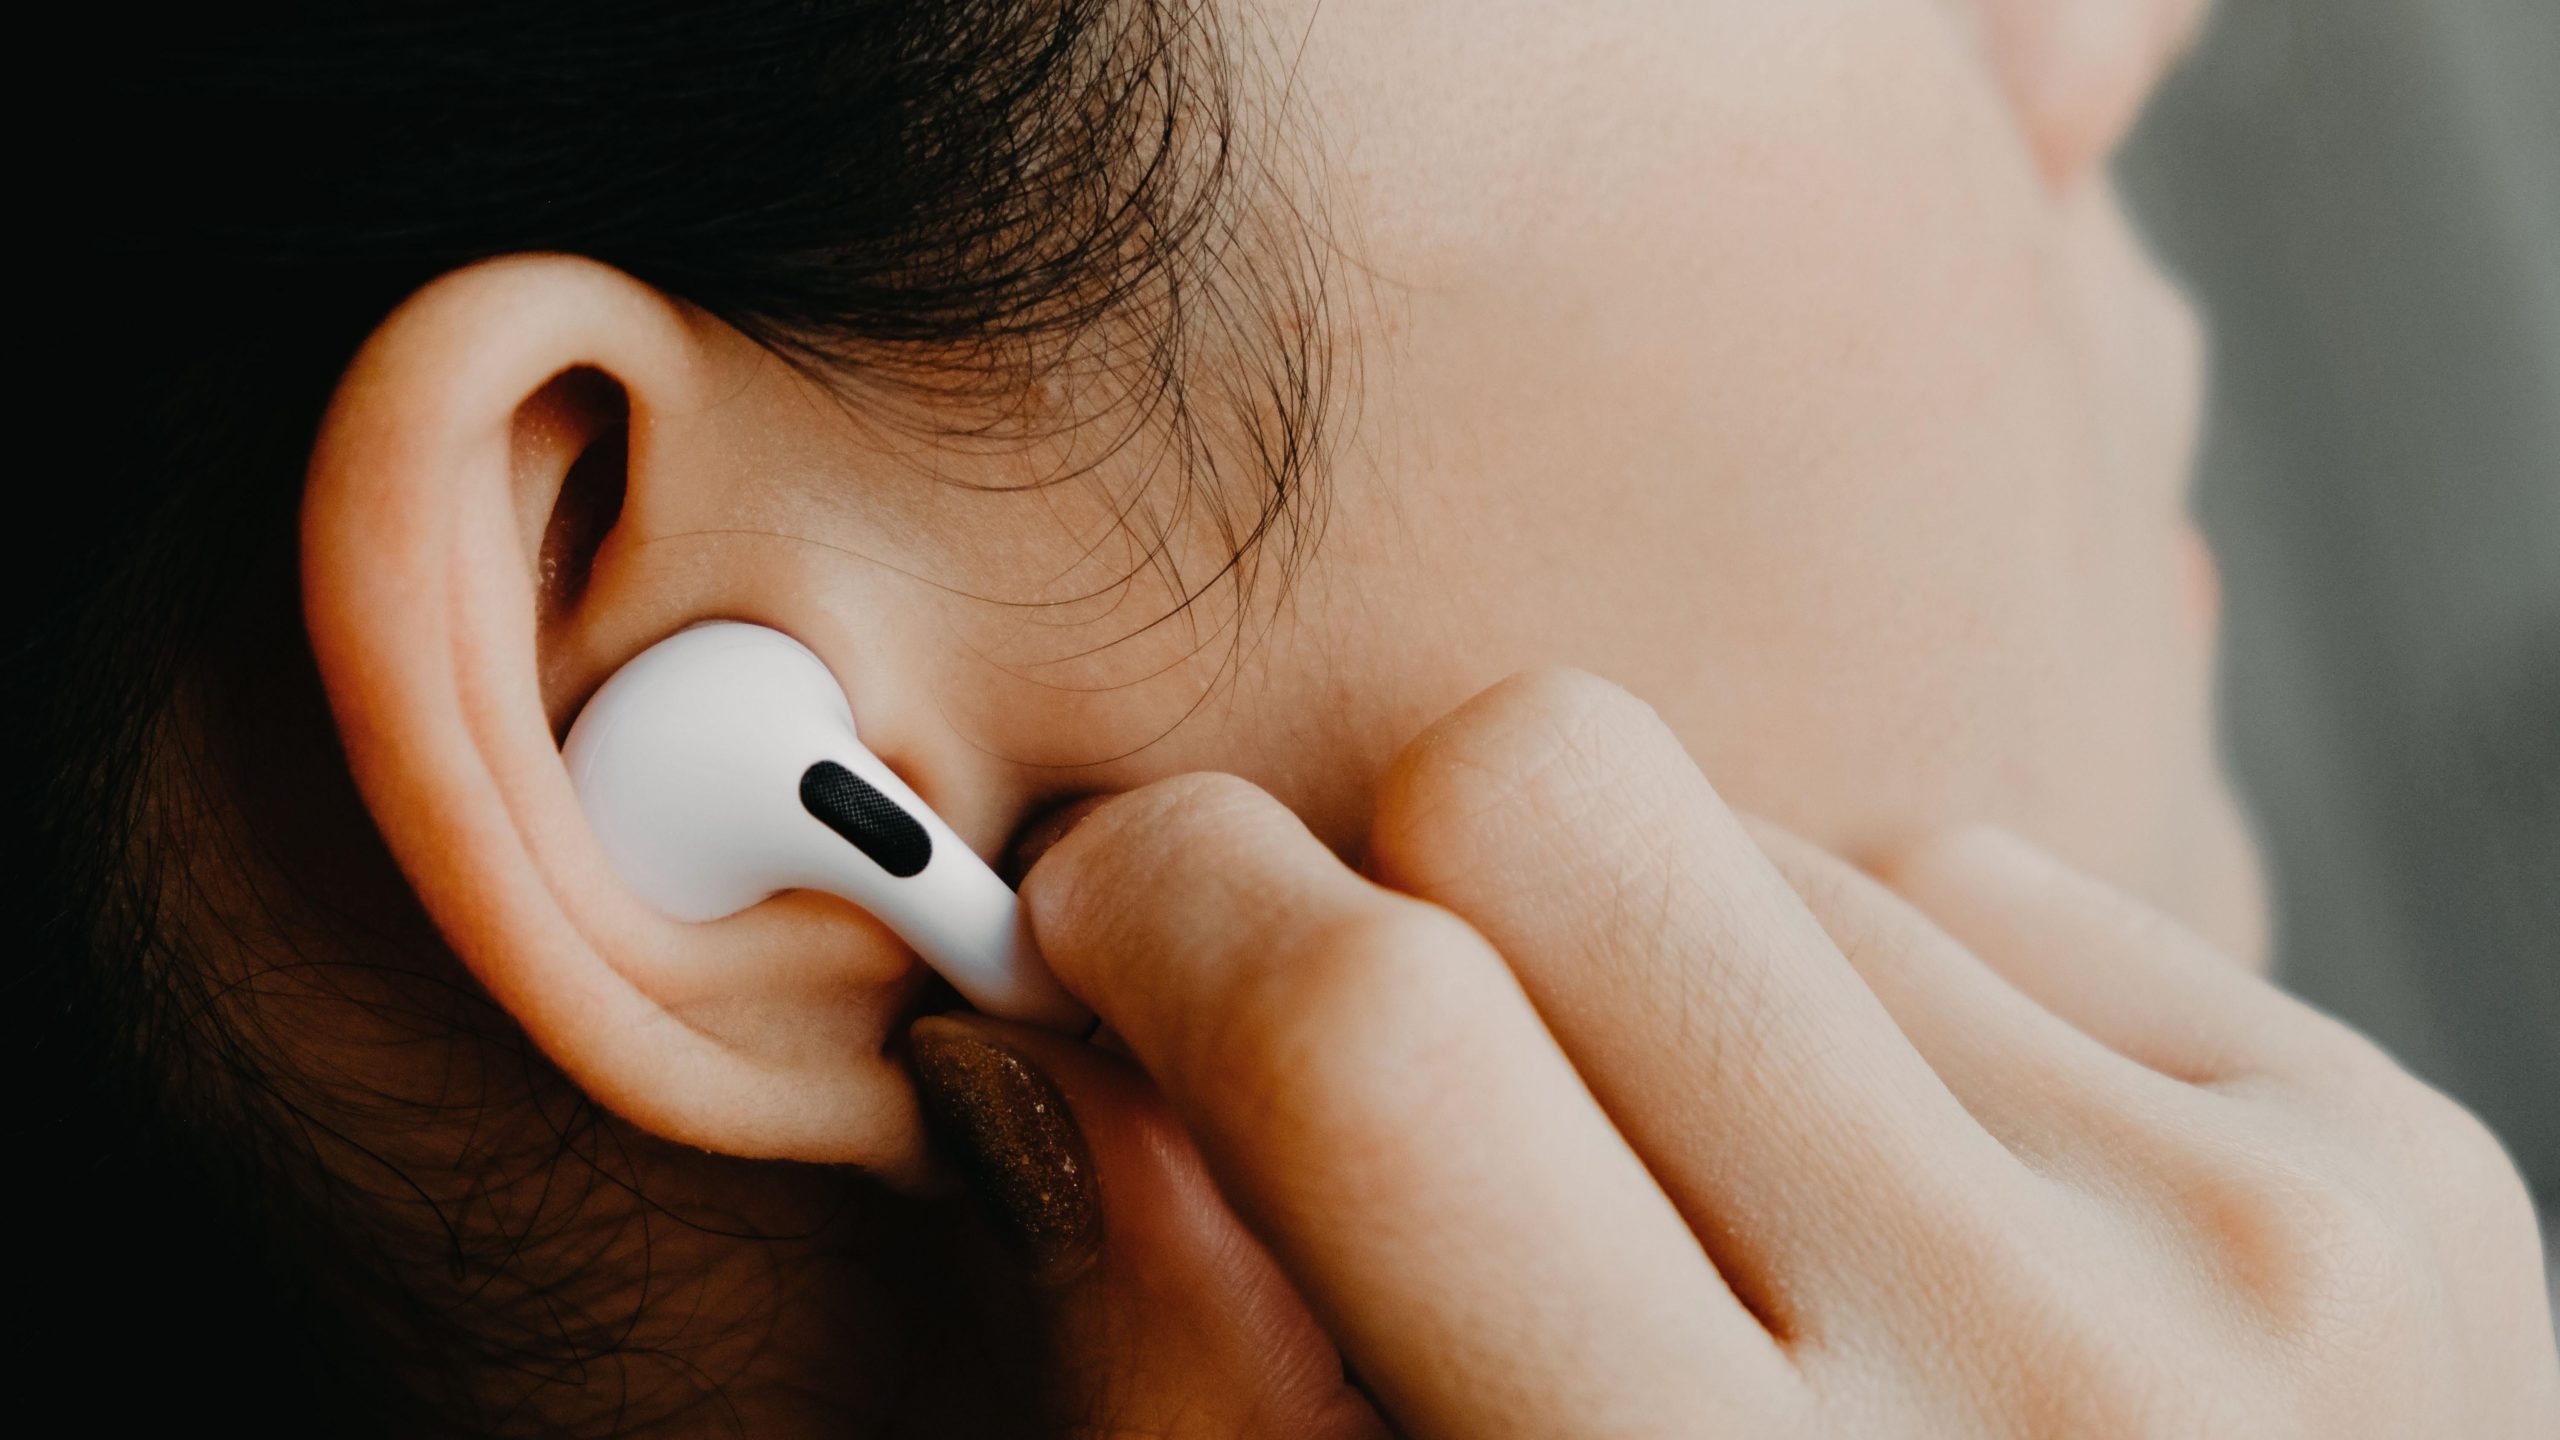 How to Enable Noise Cancellation When You’re Wearing a Single AirPod Pro